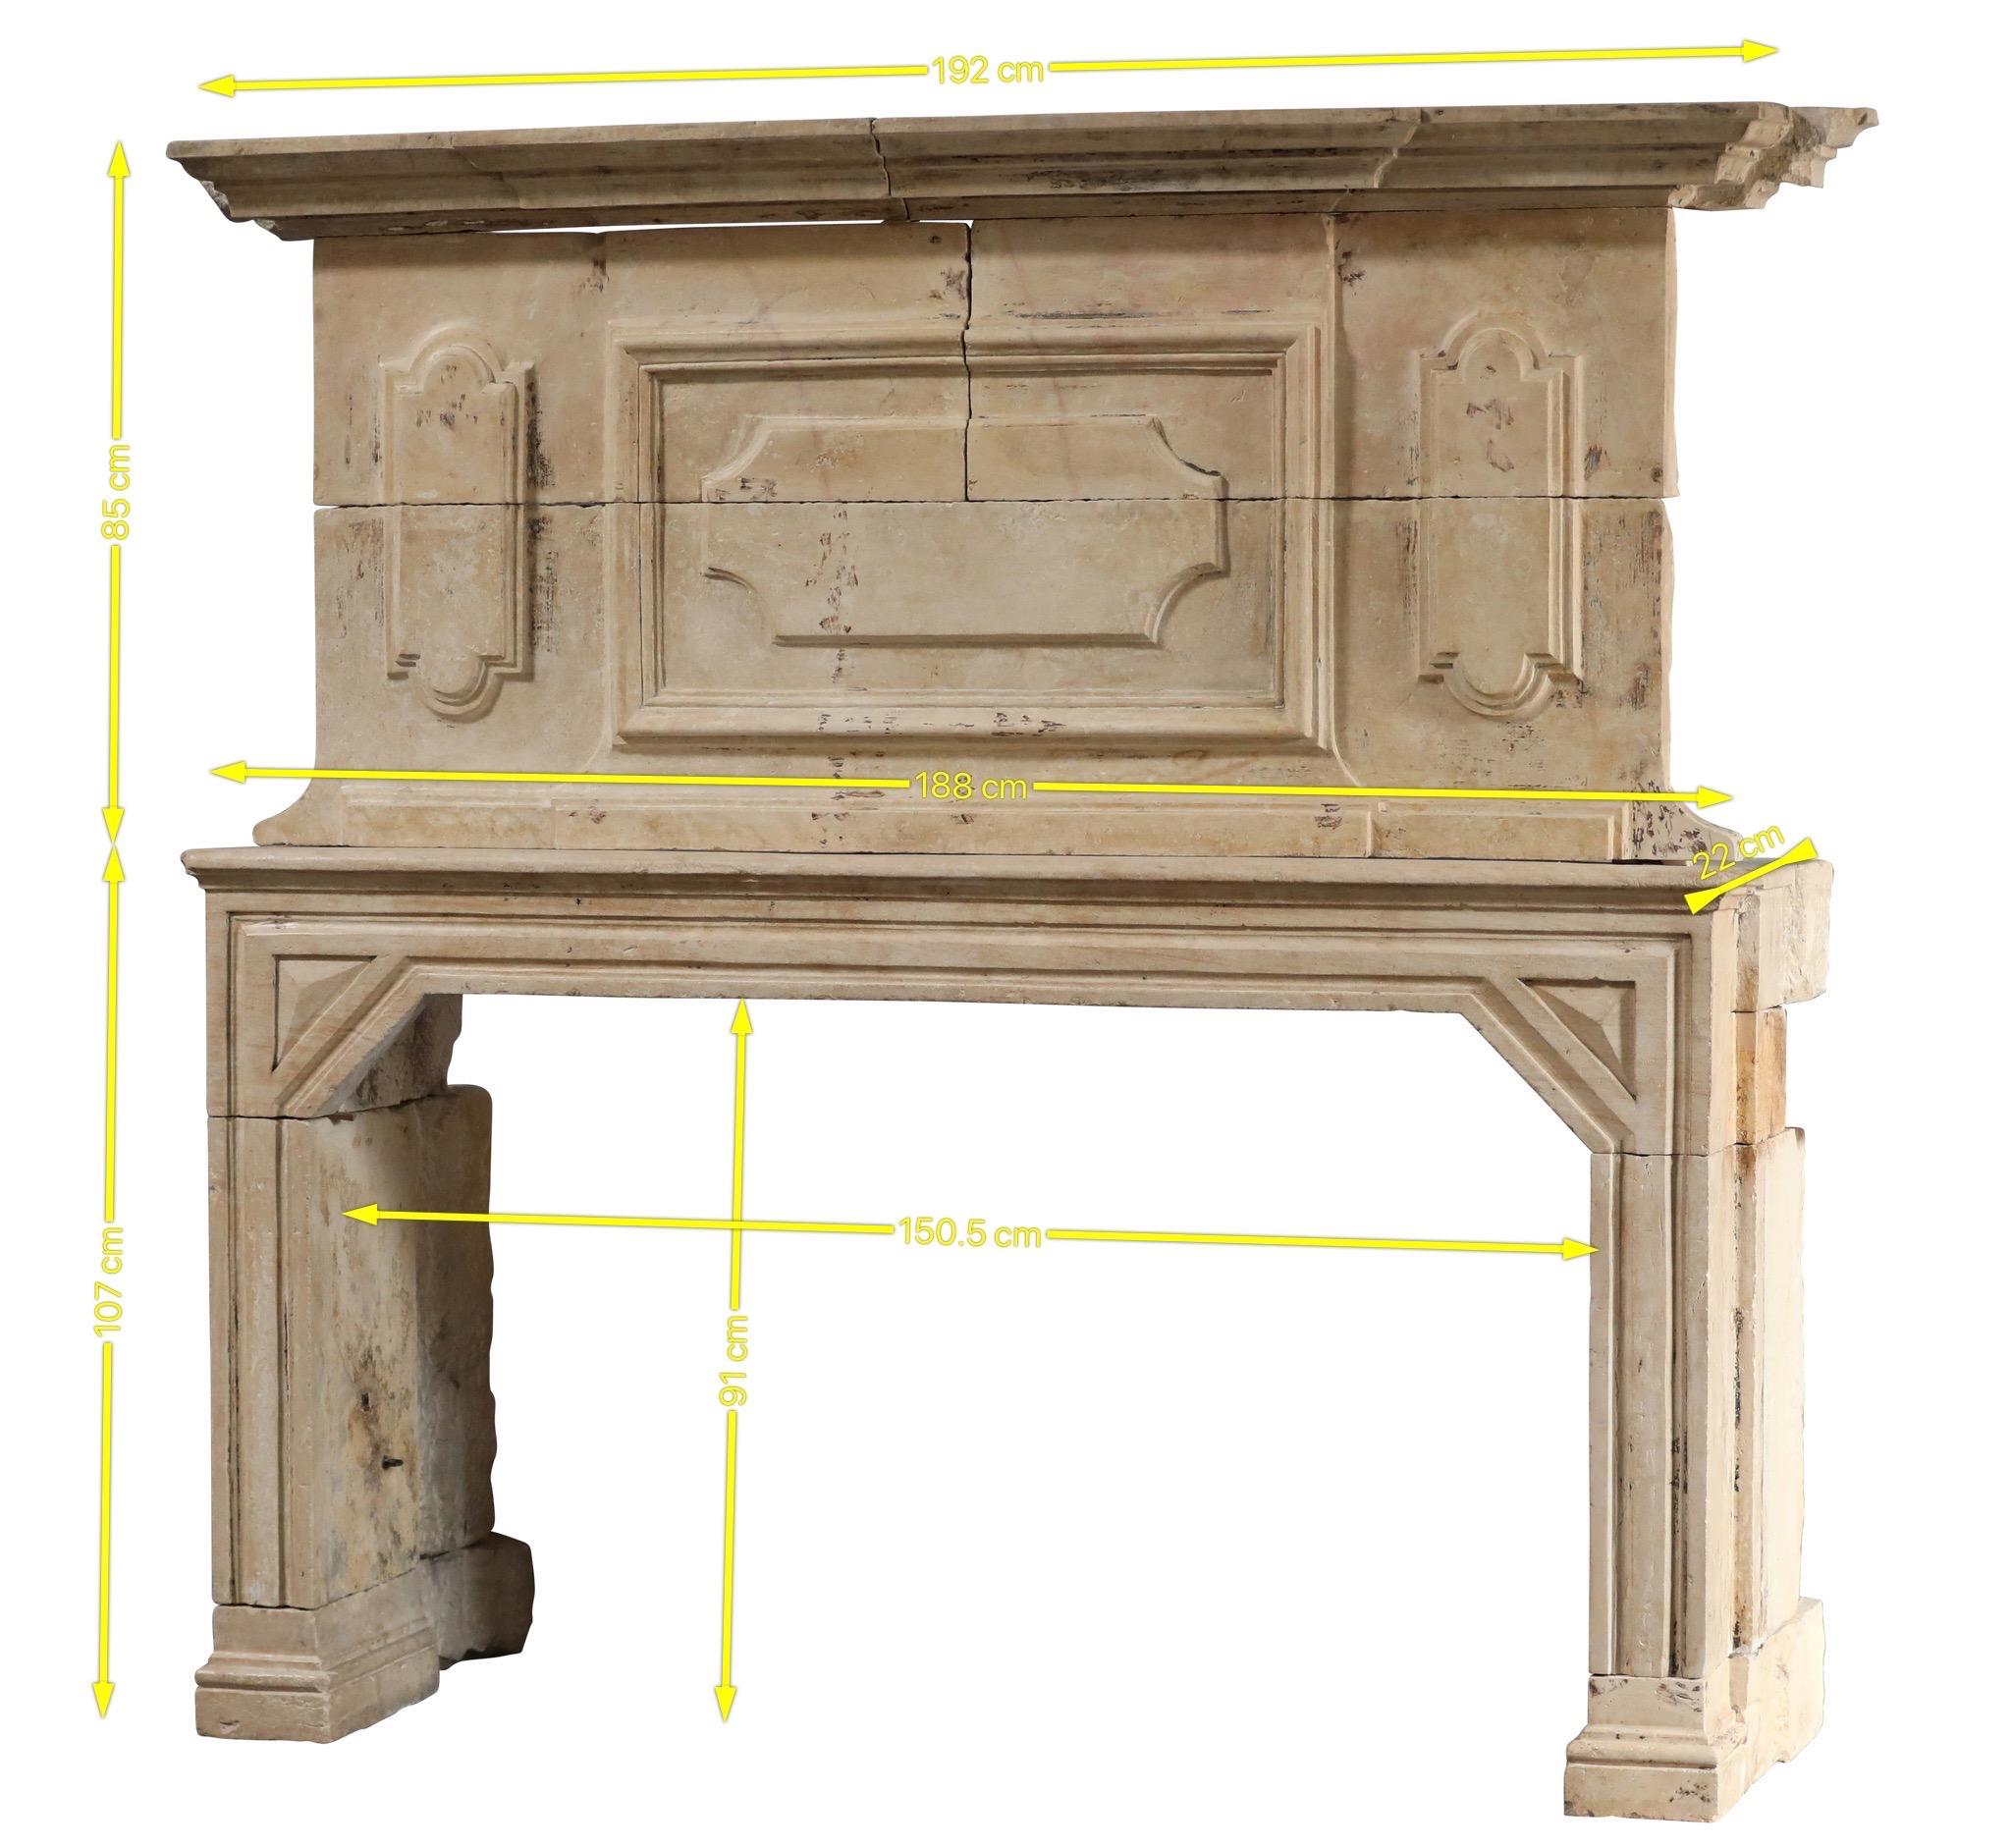 Sensational Timeless Chateau Fireplace Surround For Sale 11